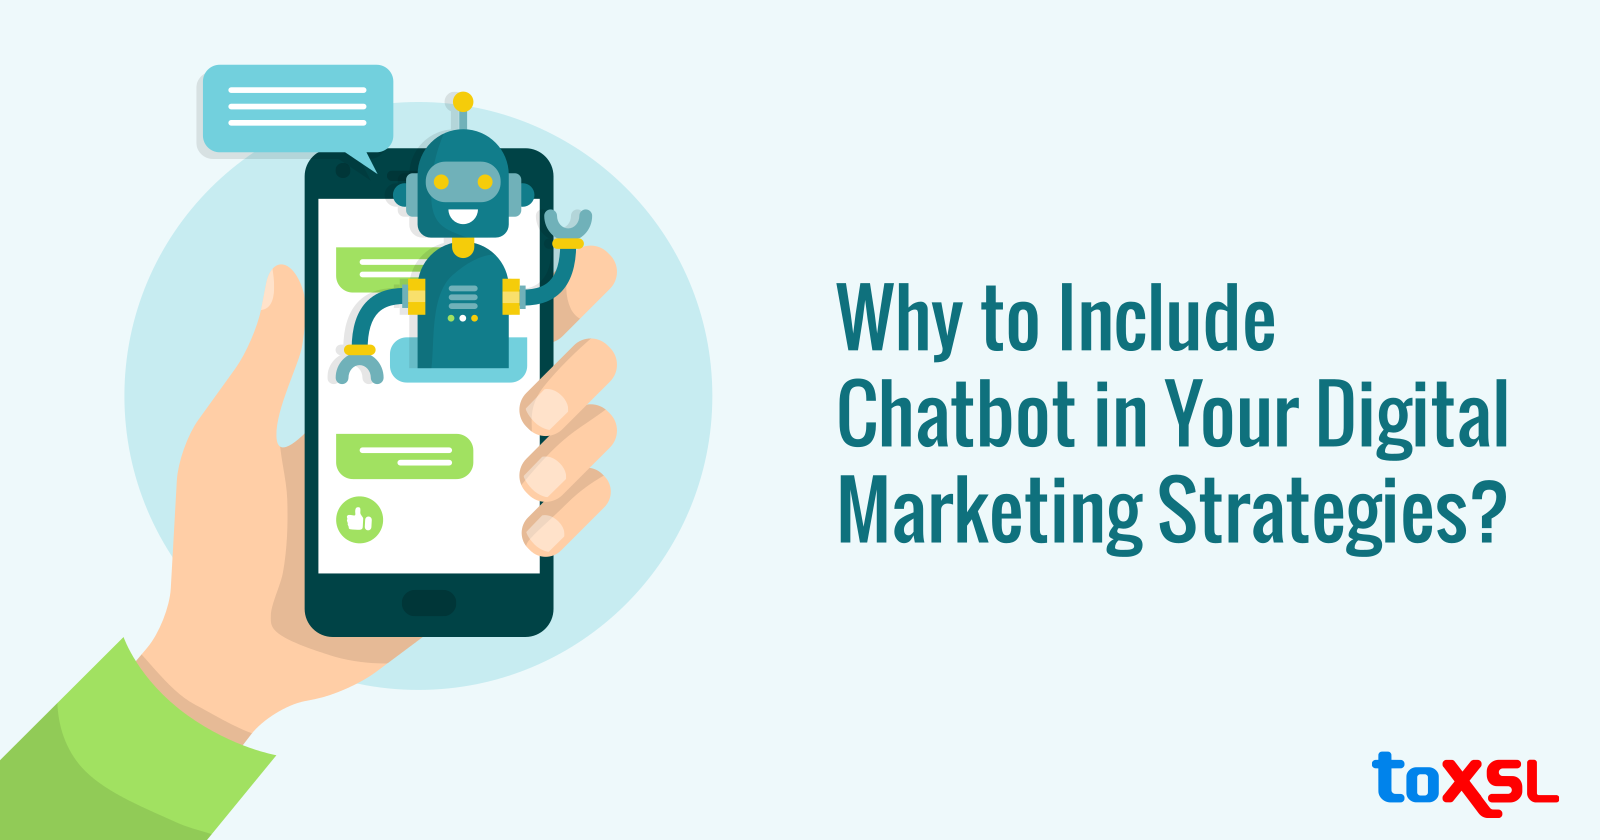 Why to Include Chatbot in Your Digital Marketing Strategies